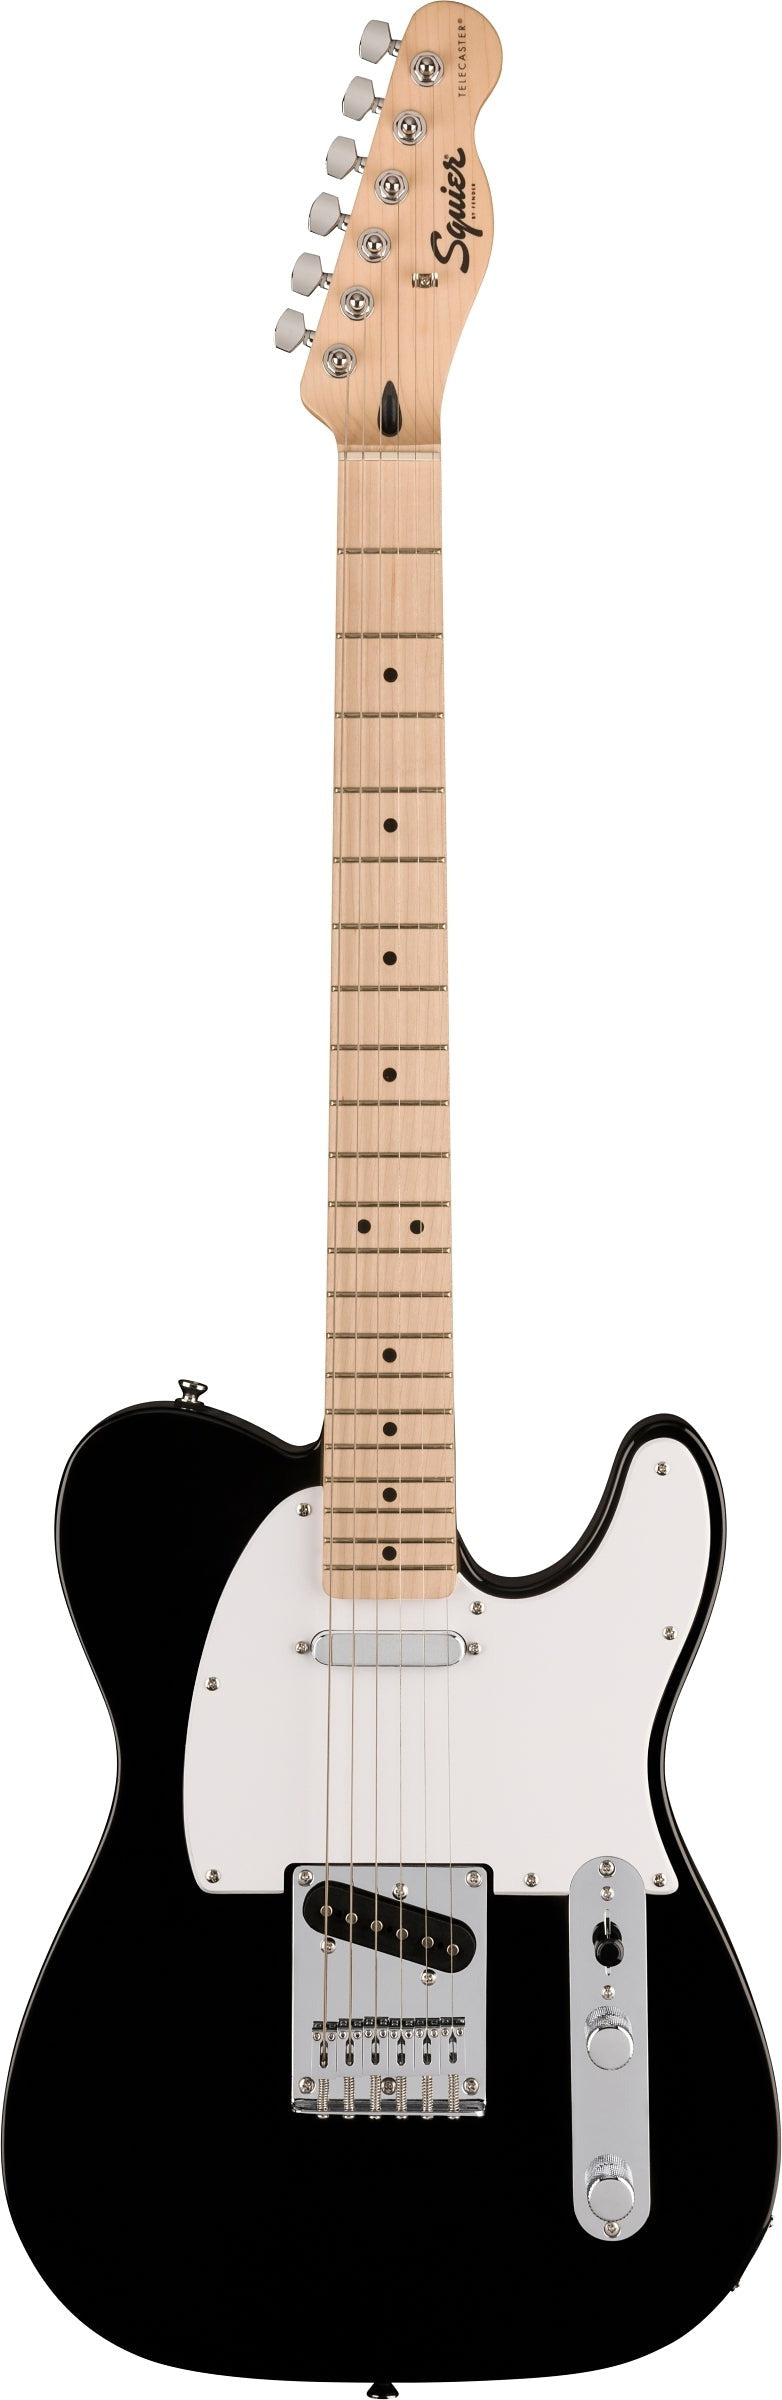 Squier Sonic Telecaster Solidbody Electric Guitar  - Black